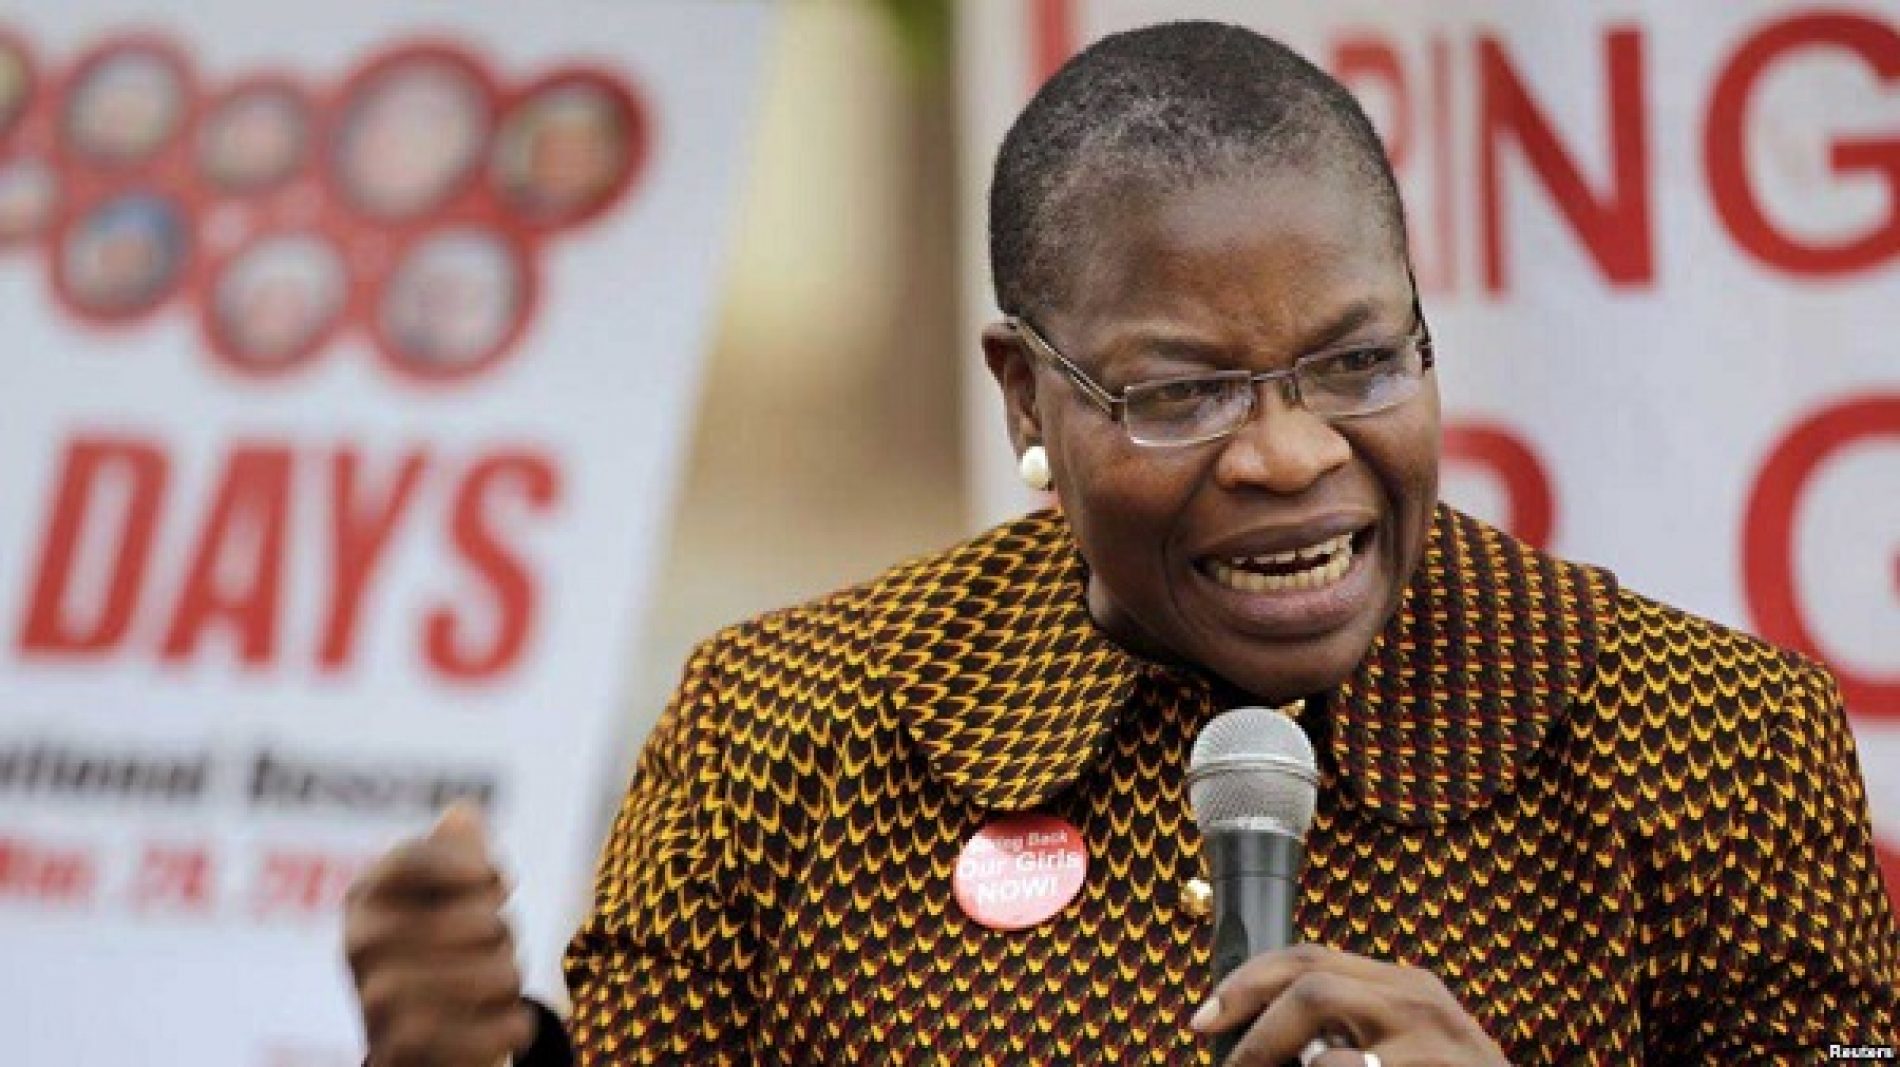 “As A Christian, I Don’t Subscribe To The Gay And Lesbian Life Choice.” Oby Ezekwesili Clarifies